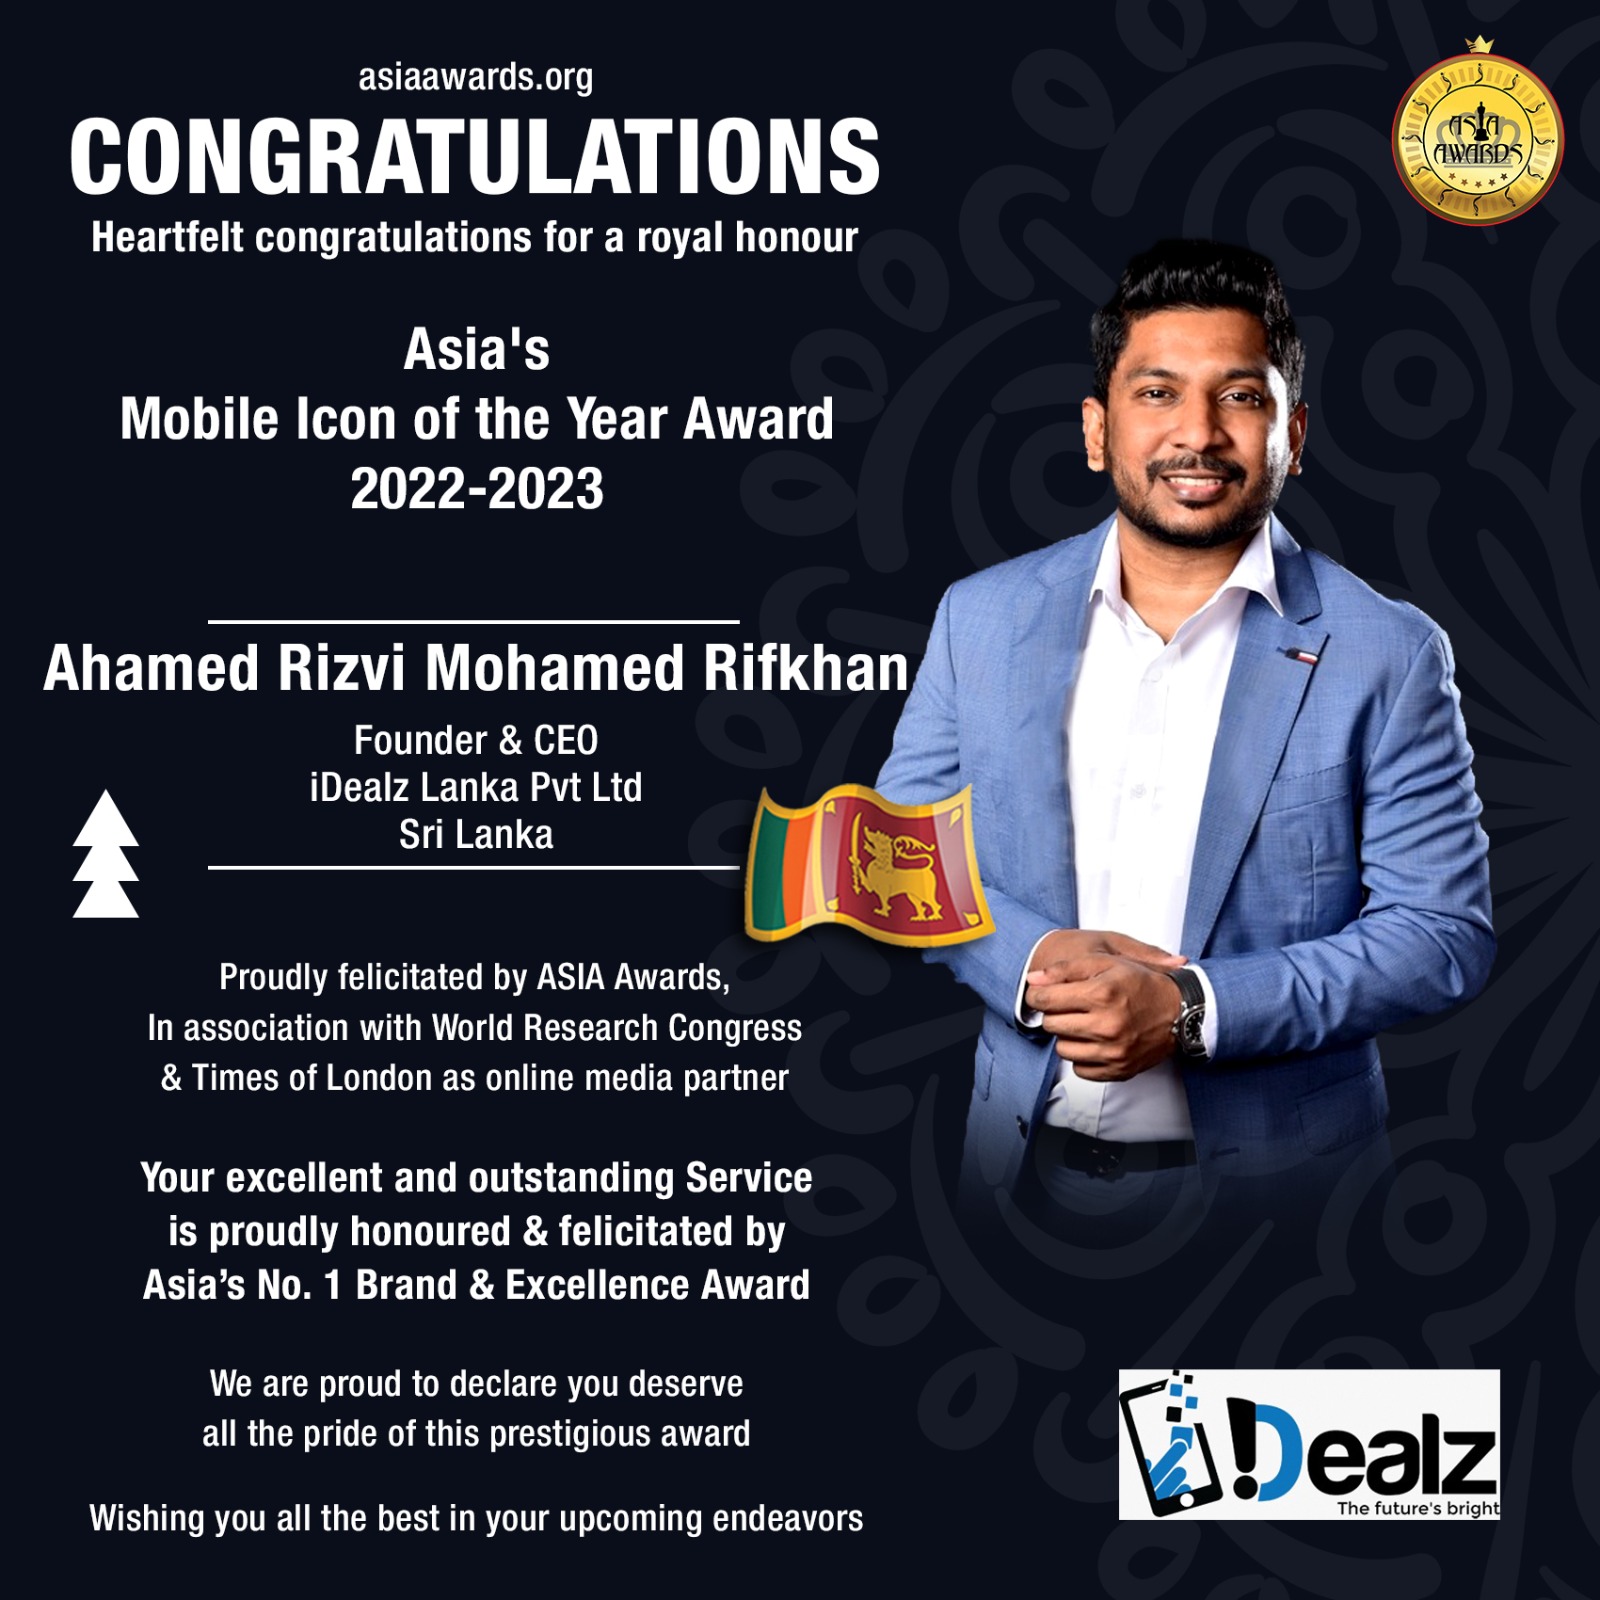 Ahamed Rizvi Mohamed Rifkhan Has bagged Asia's Mobile Icon of the Year Award